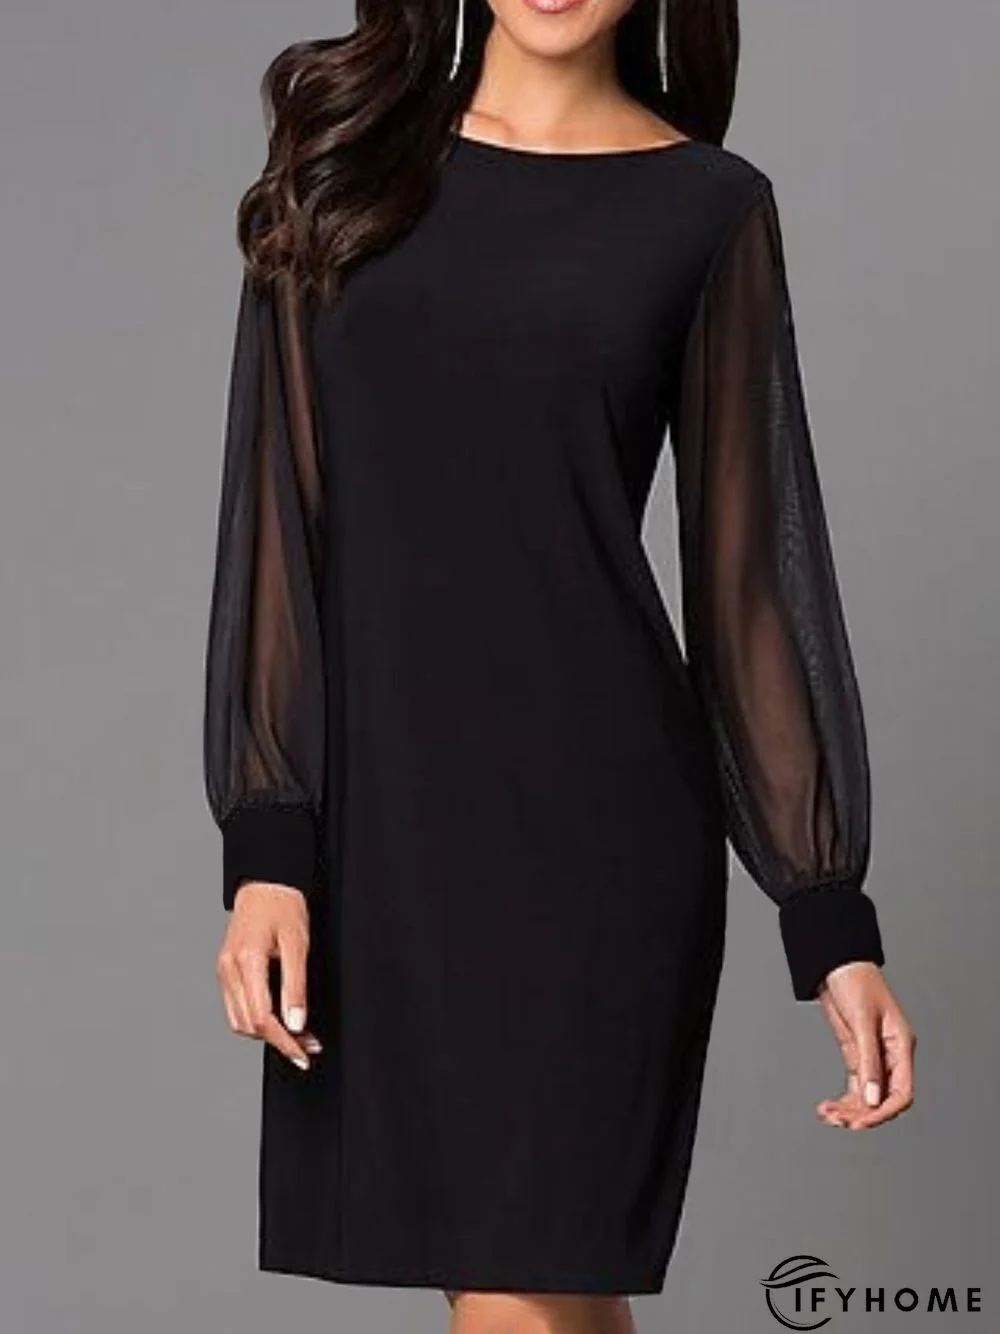 Party Long Sleeve Crew Neck Dress | IFYHOME